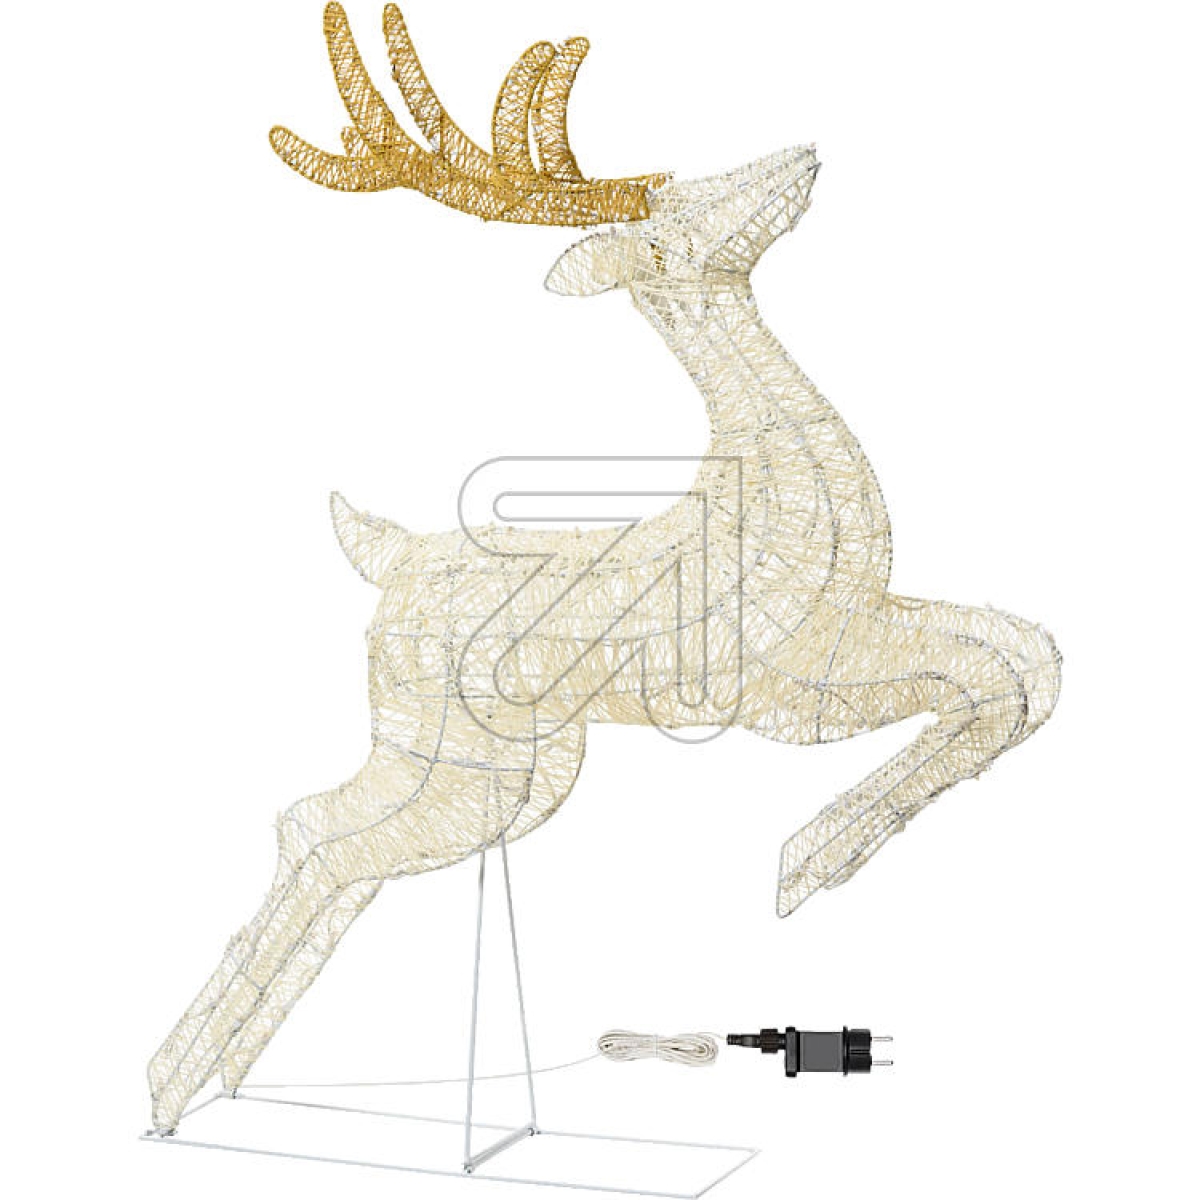 LottiLED reindeer galloping 95cm 75504Article-No: 837745